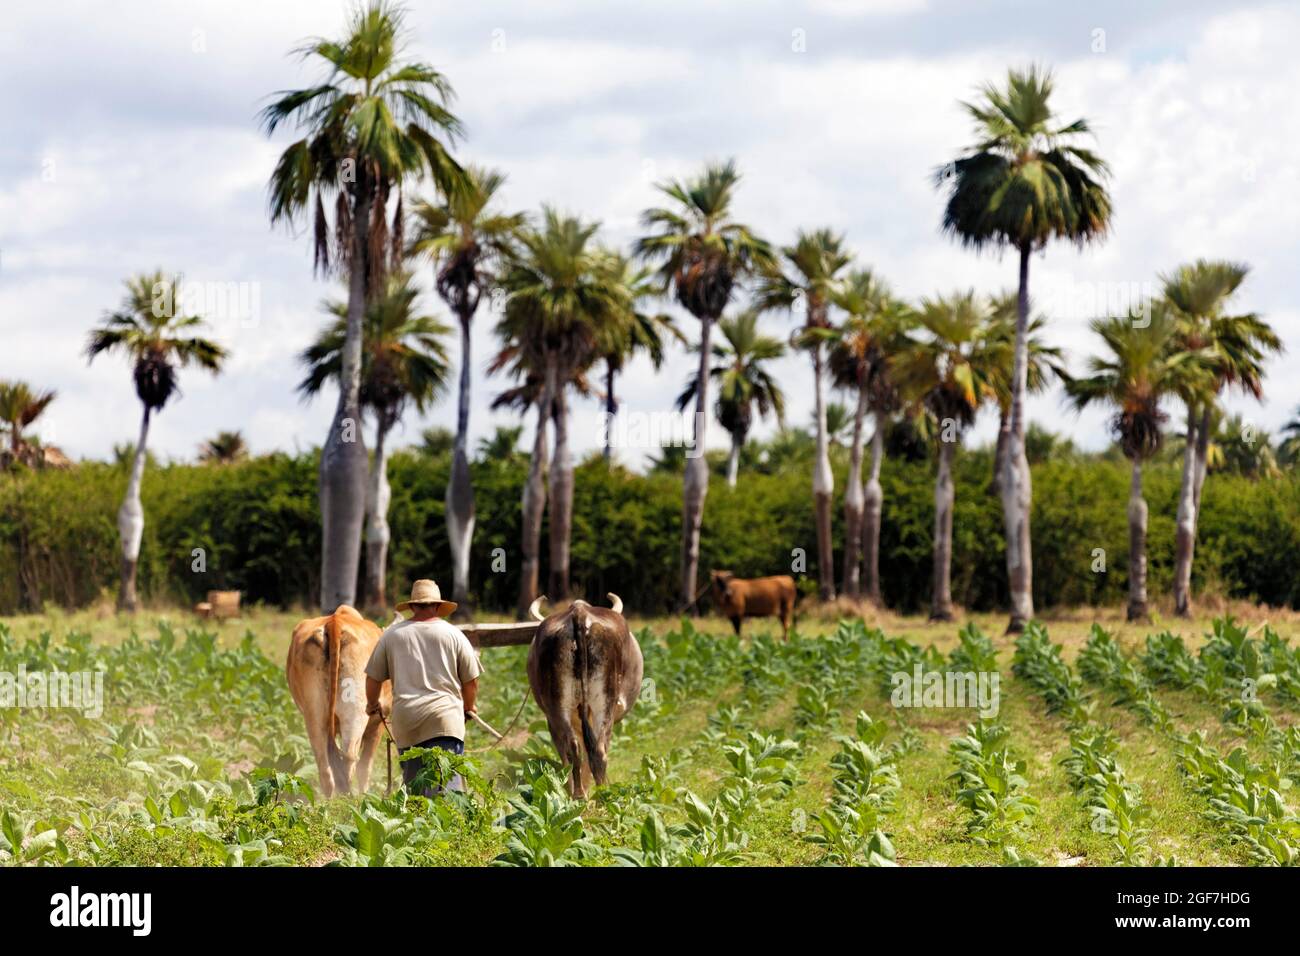 Farmer, Cuban, ploughing tobacco field with two oxen and plough, Pregnant palm, Palma barrigona (Colpothrinax wrightii) endemic, Las Tunas Province Stock Photo